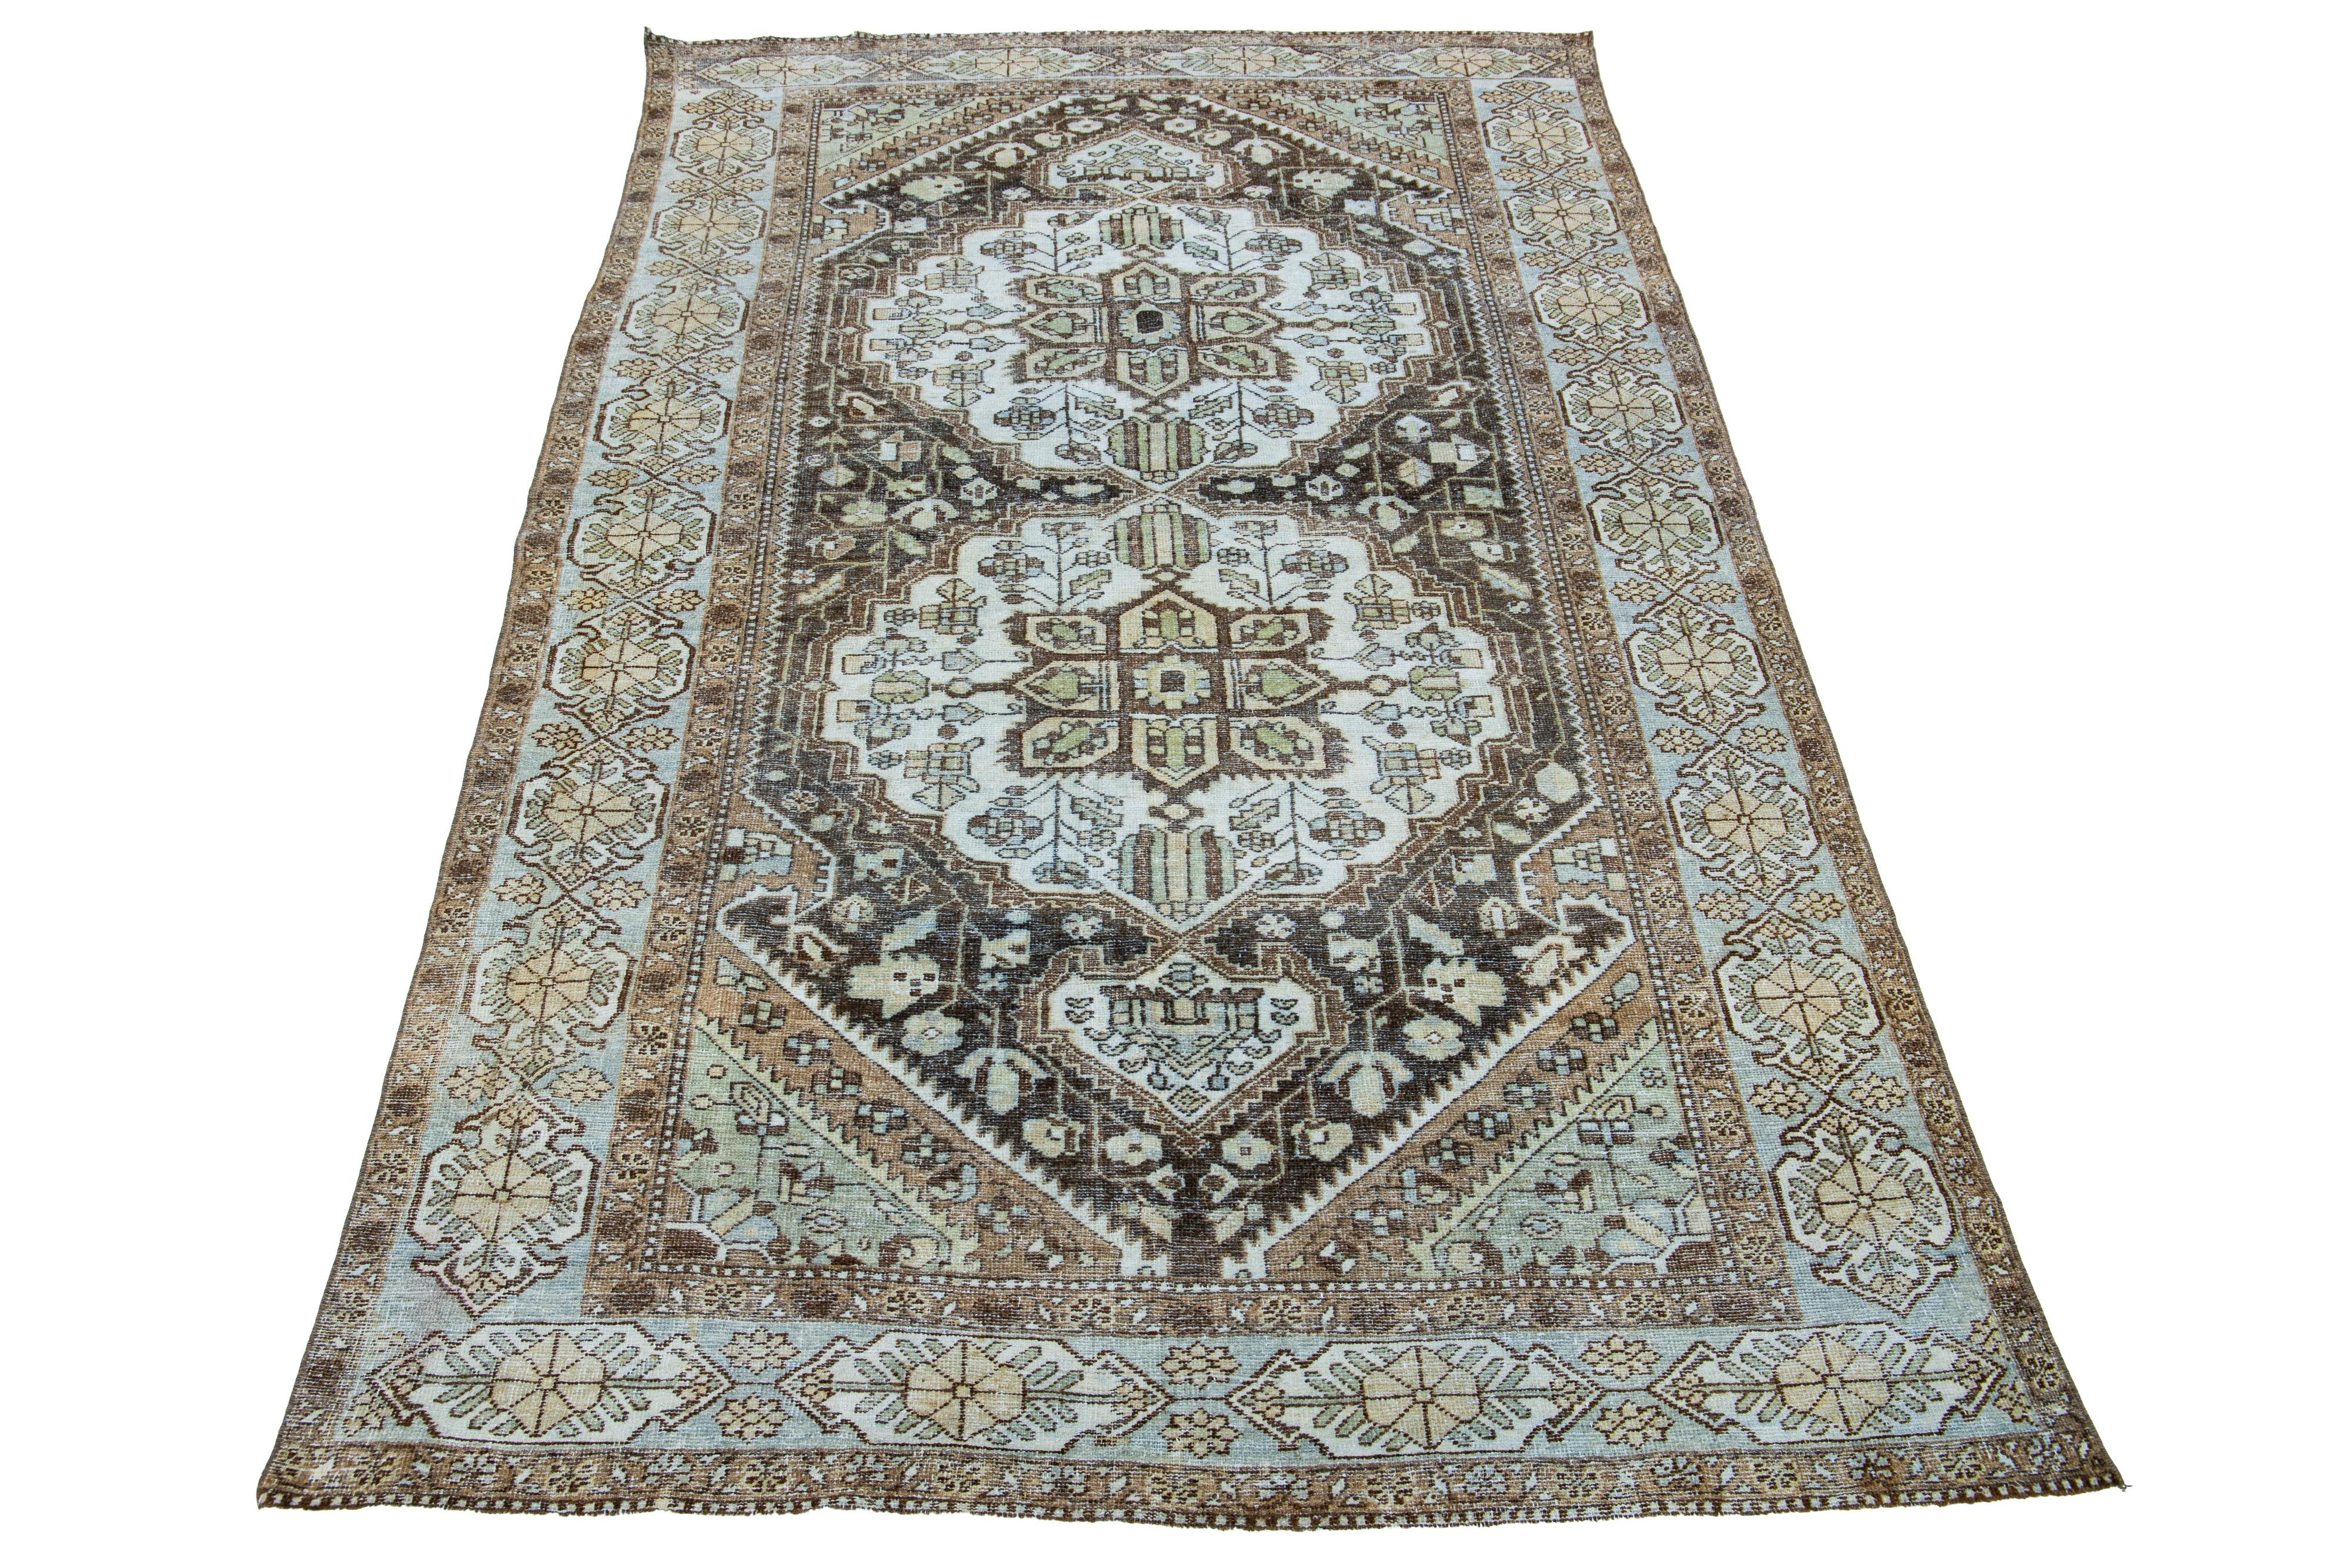 Beautiful antique Persian Mahal hand-knotted wool rug with a brown color field. This piece has a blue-designed frame with ivory, green, and blue accents in a gorgeous medallion floral design.

This rug measures 5'6